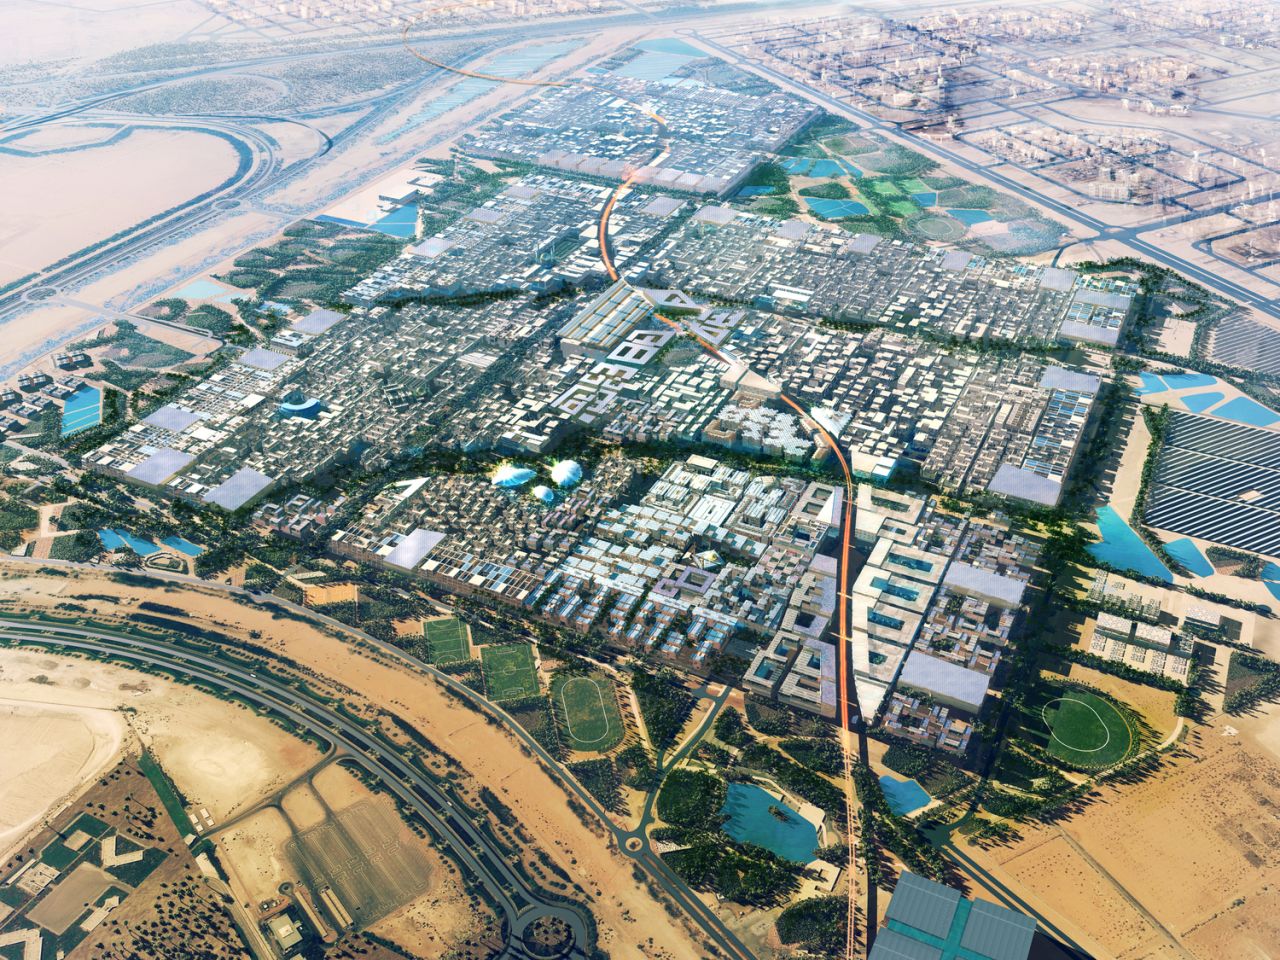 <a href="http://masdarcity.ae/en/" target="_blank" target="_blank">Masdar City</a>, is a new city in the emirate of Abu Dhabi, which builders The Abu Dhabi Future Energy Company they say will be an entirely "green," using only solar and other sustainable energy sources. Cars will be banned -- people will be able to travel around the city in personal rapid transit system podcars. Masdar will be completed around 2020, they say.